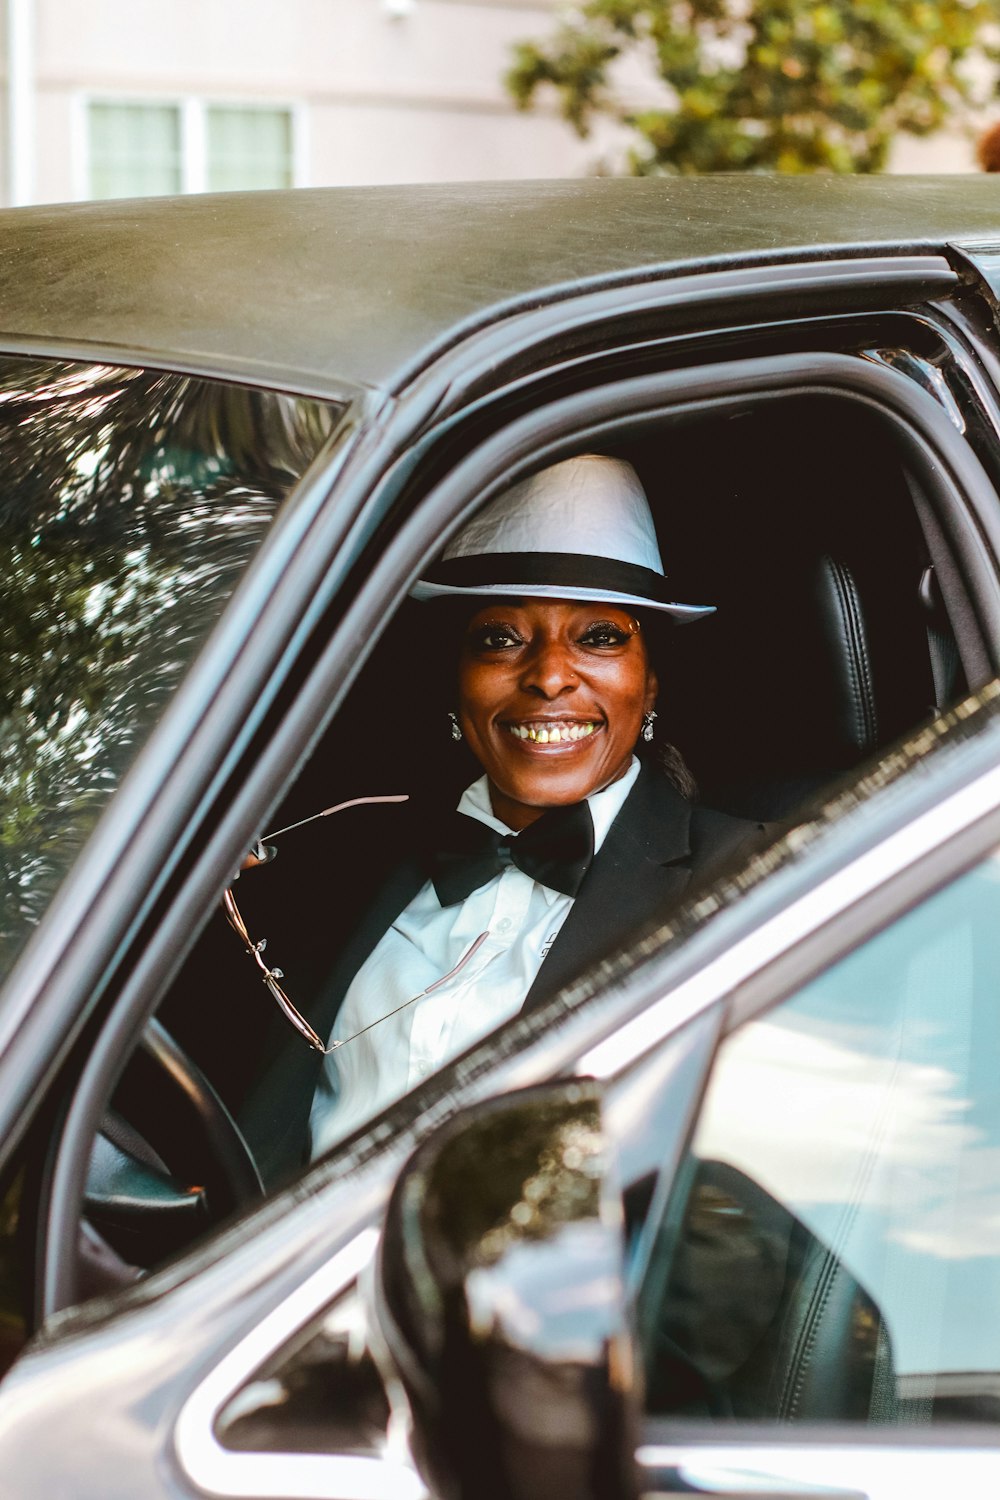 a woman in a car wearing a hat and a bow tie